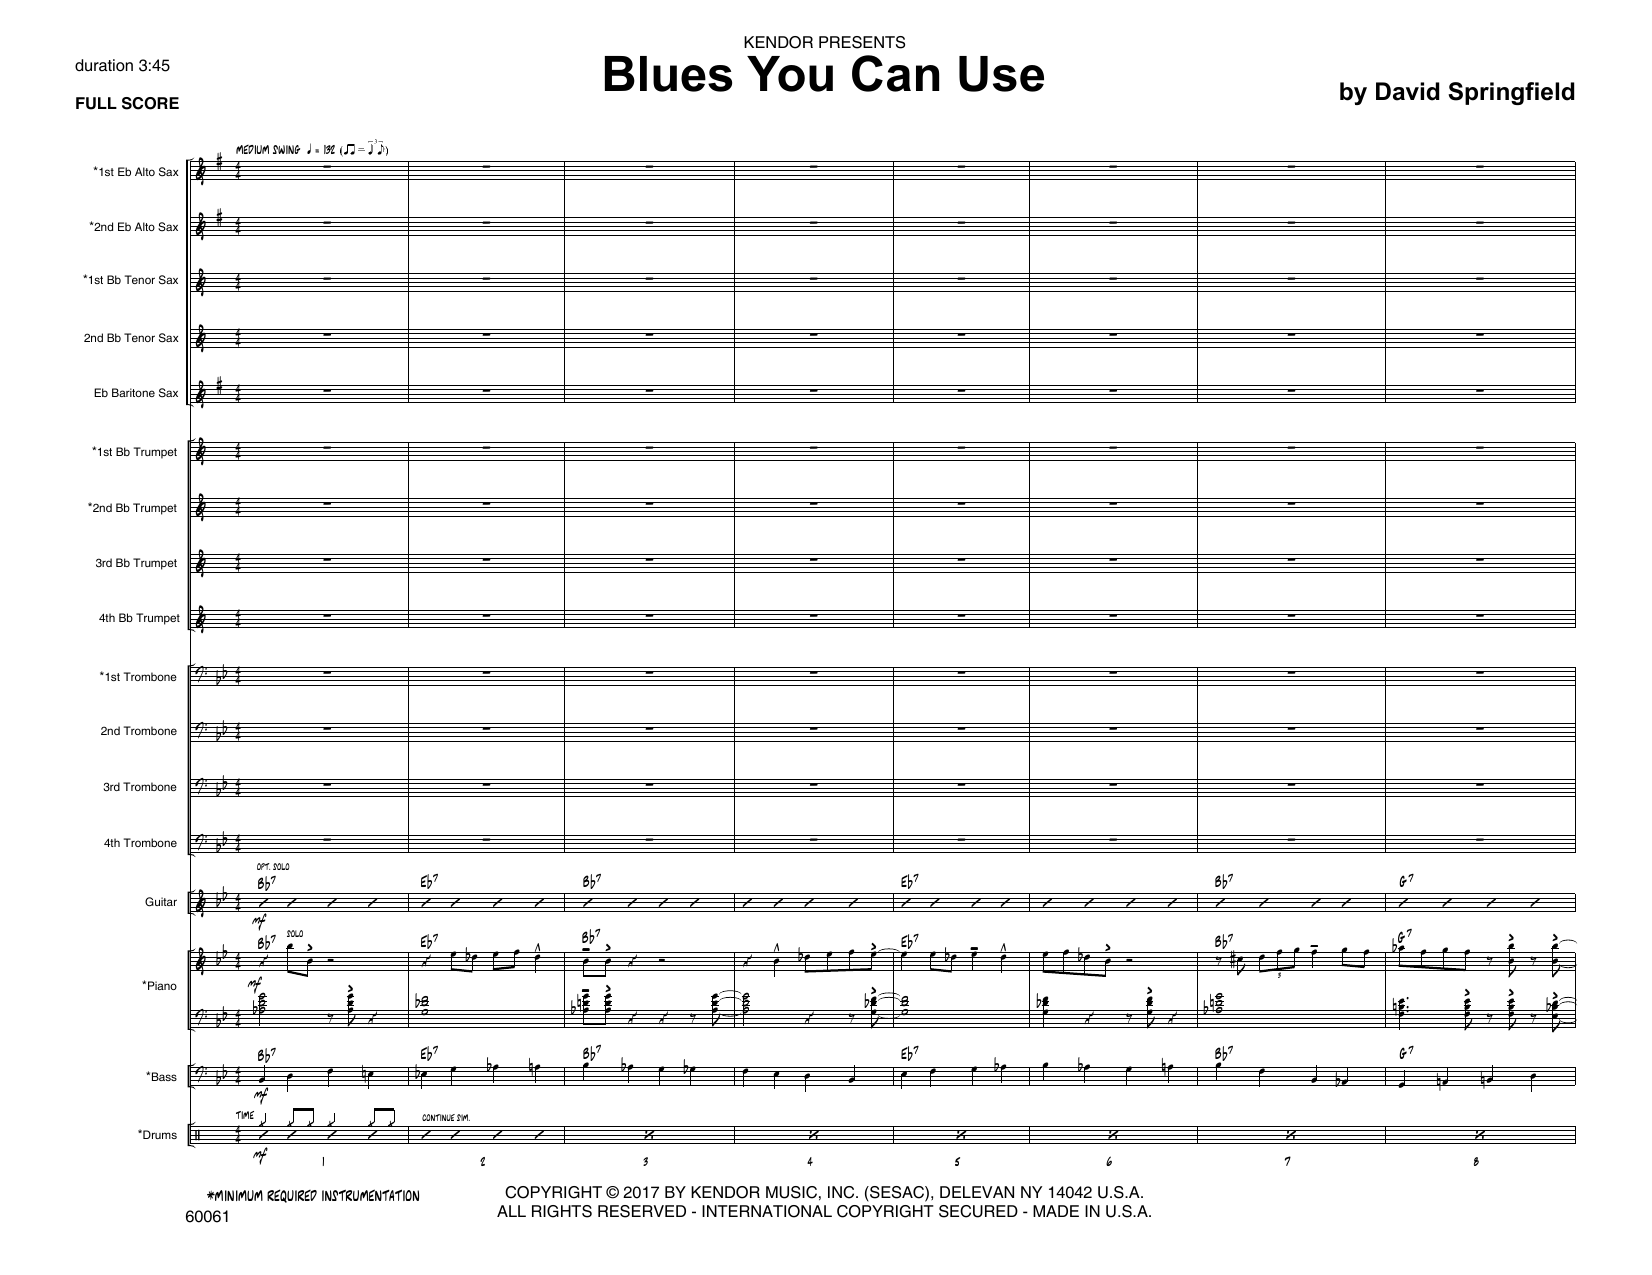 Download David Springfield Blues You Can Use - Full Score sheet music and printable PDF score & Jazz music notes